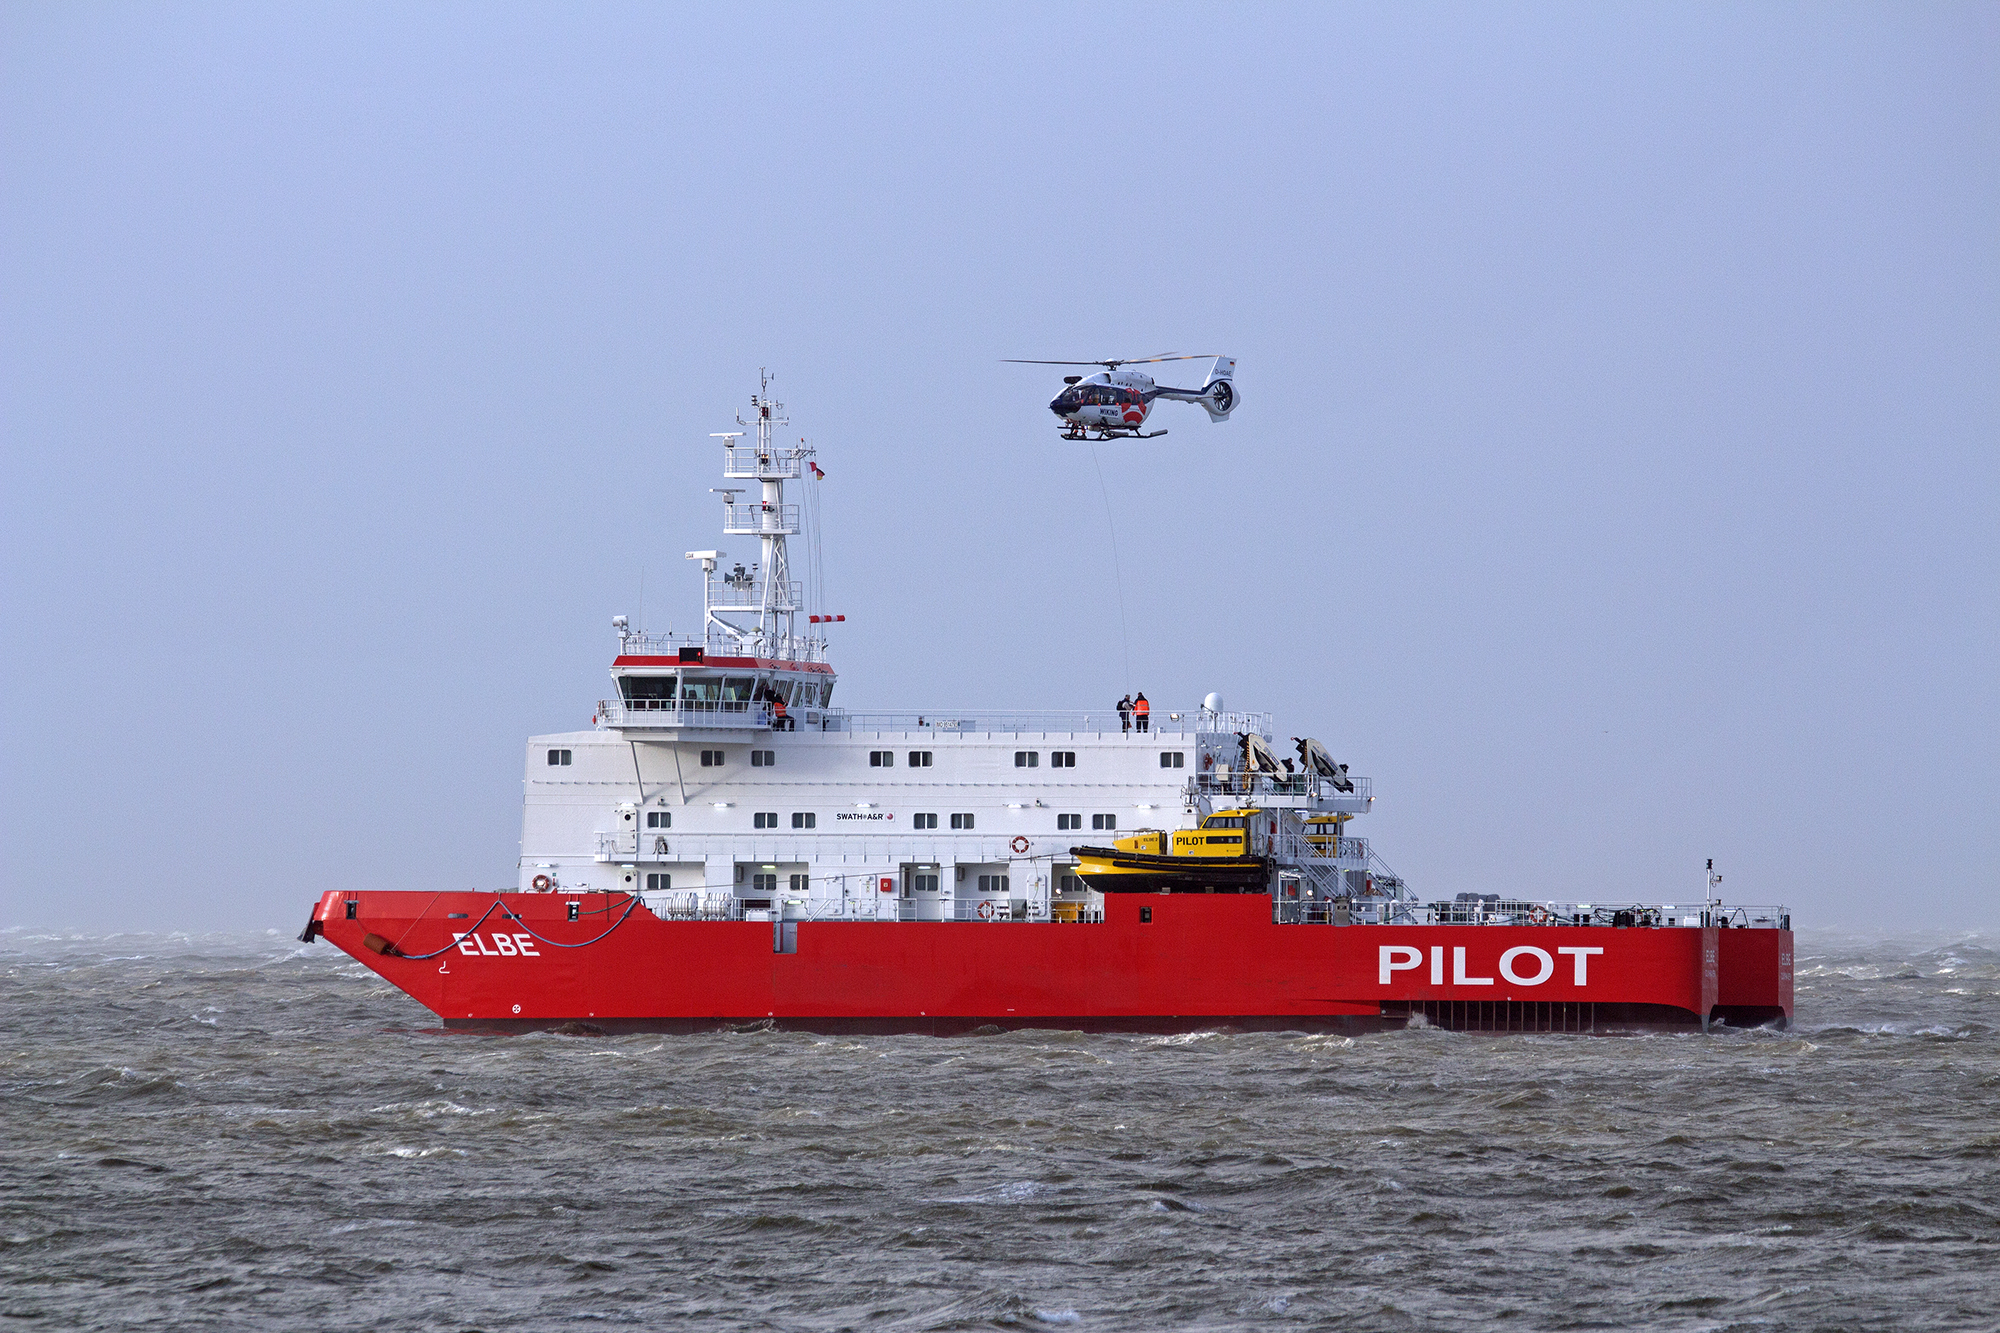 Elbe w helicopter